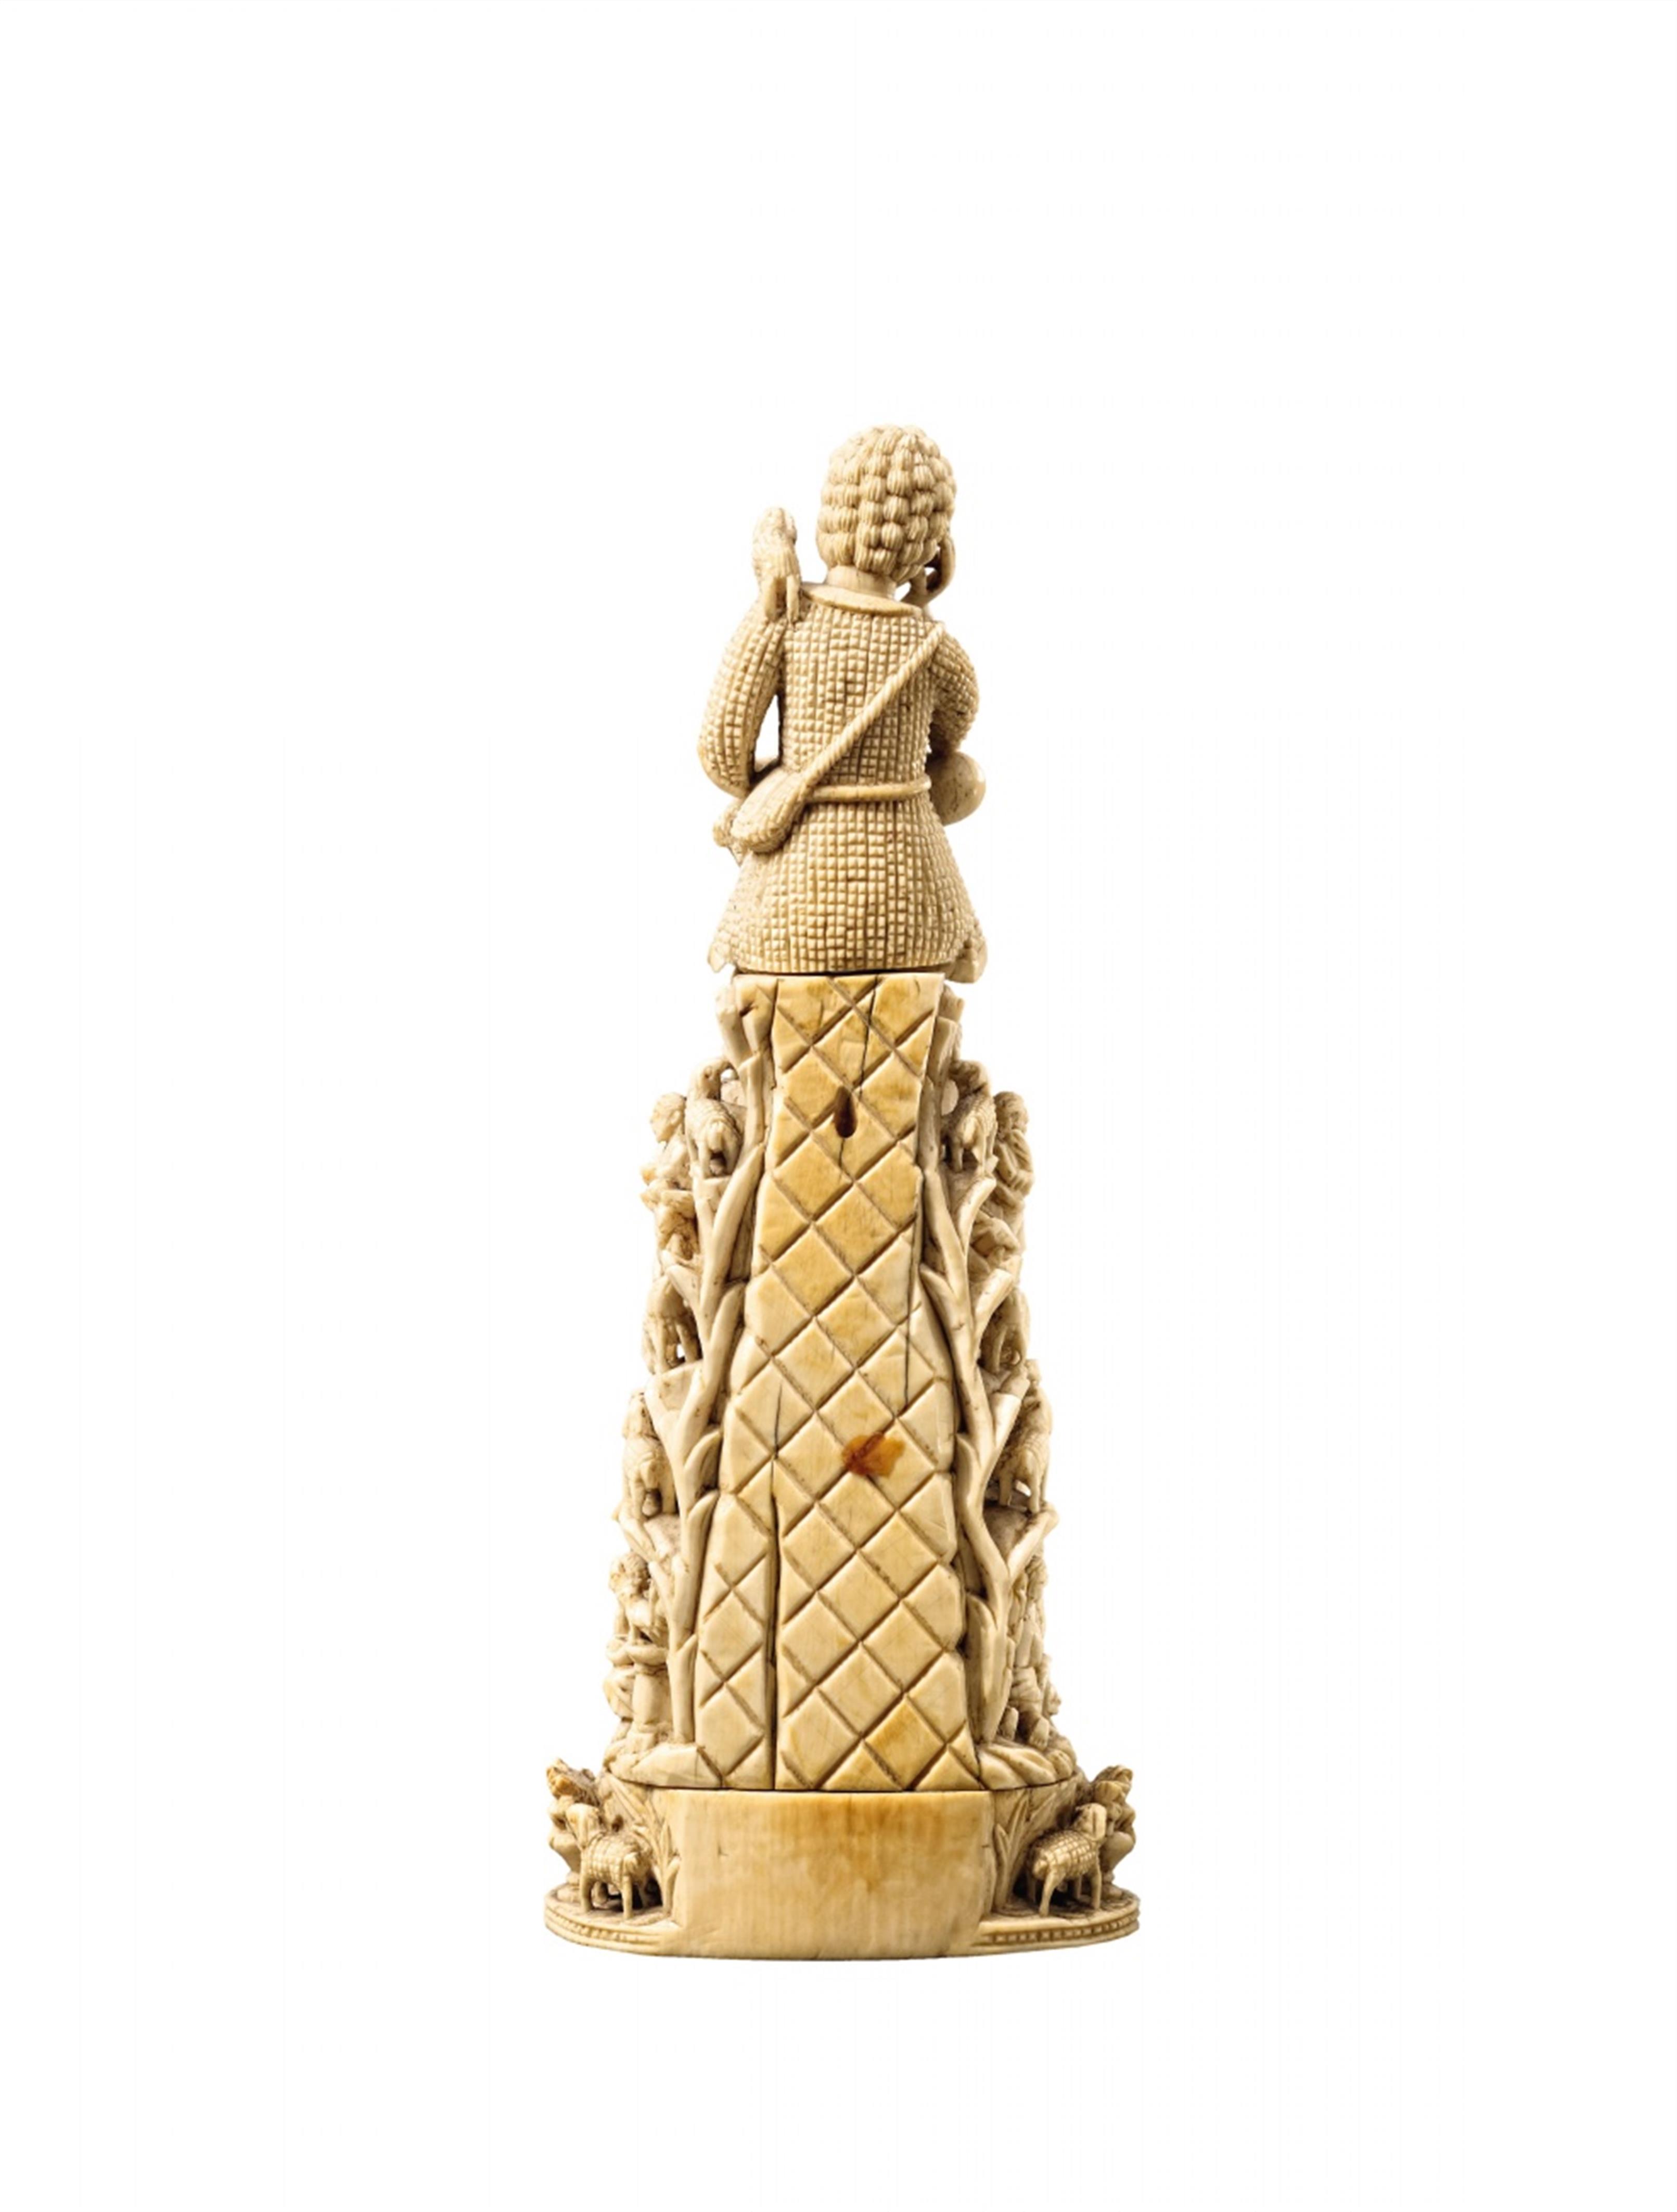 Goa 17th - 18th century - A 17th - 18th century small Goan carved ivory depiction of Christ as the good shepherd. - image-2